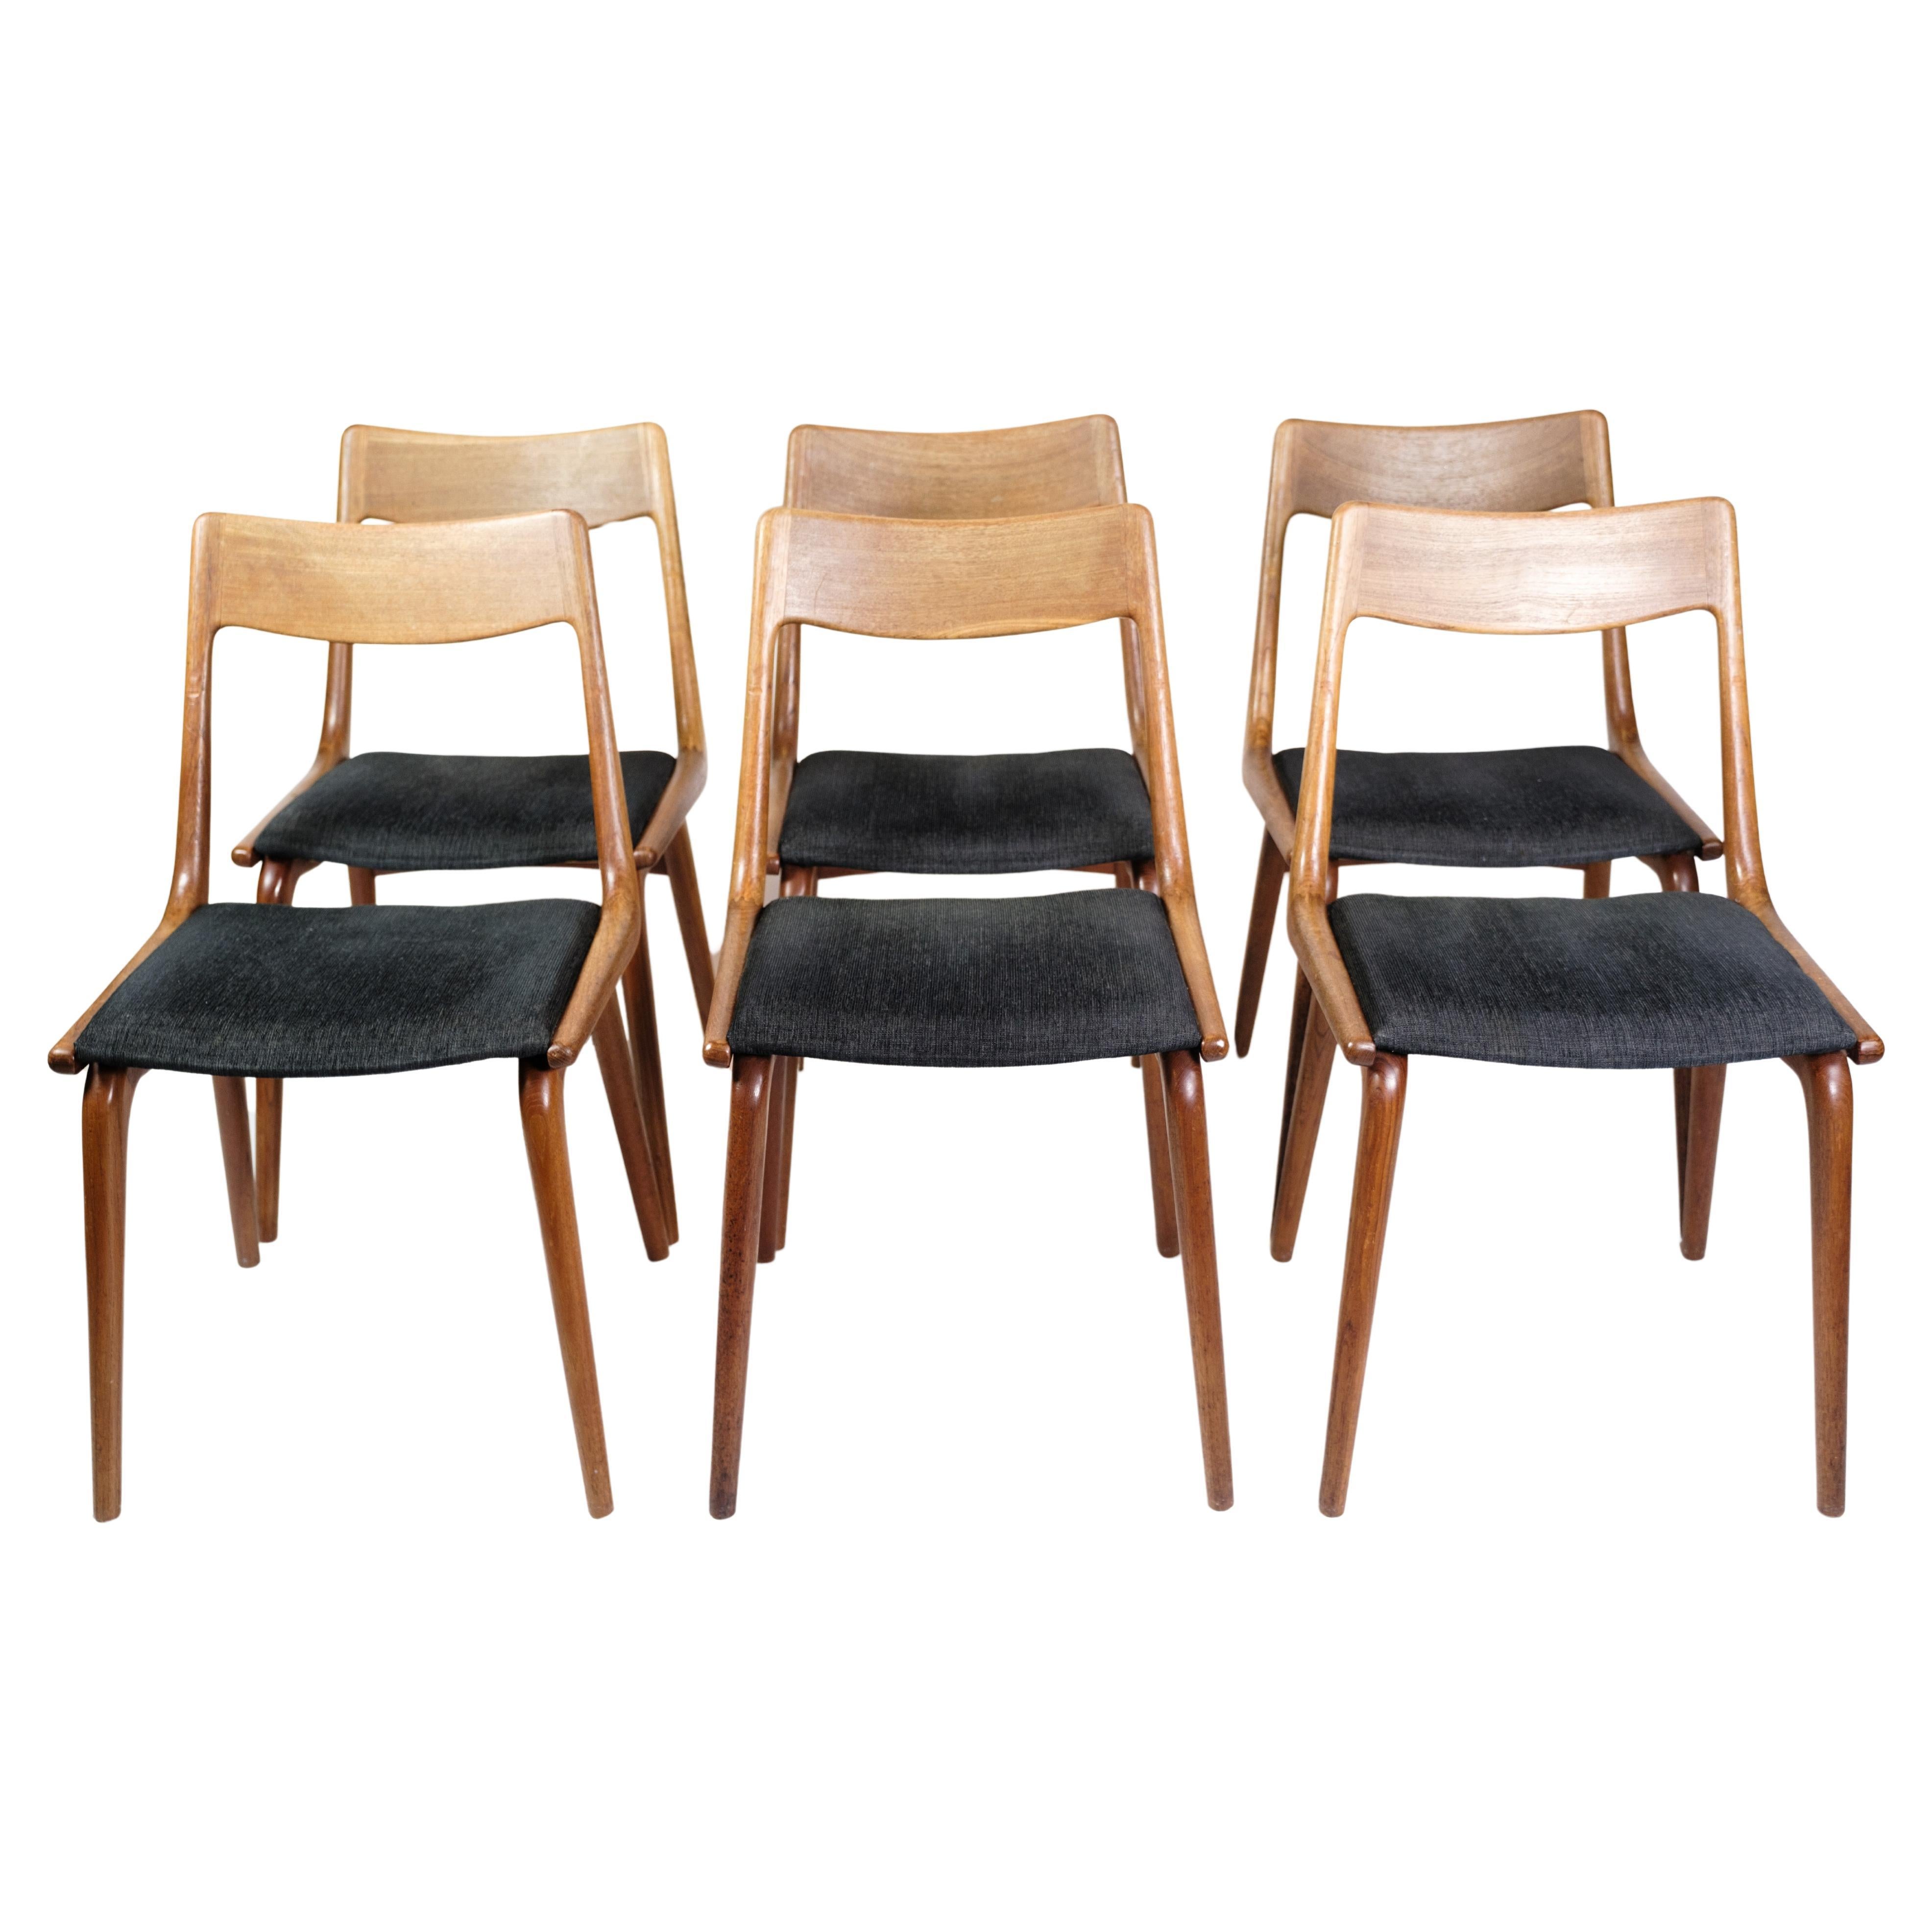 Set Of 6 Dining Room Chairs Model 370 By Alfred Christensen From 1950s